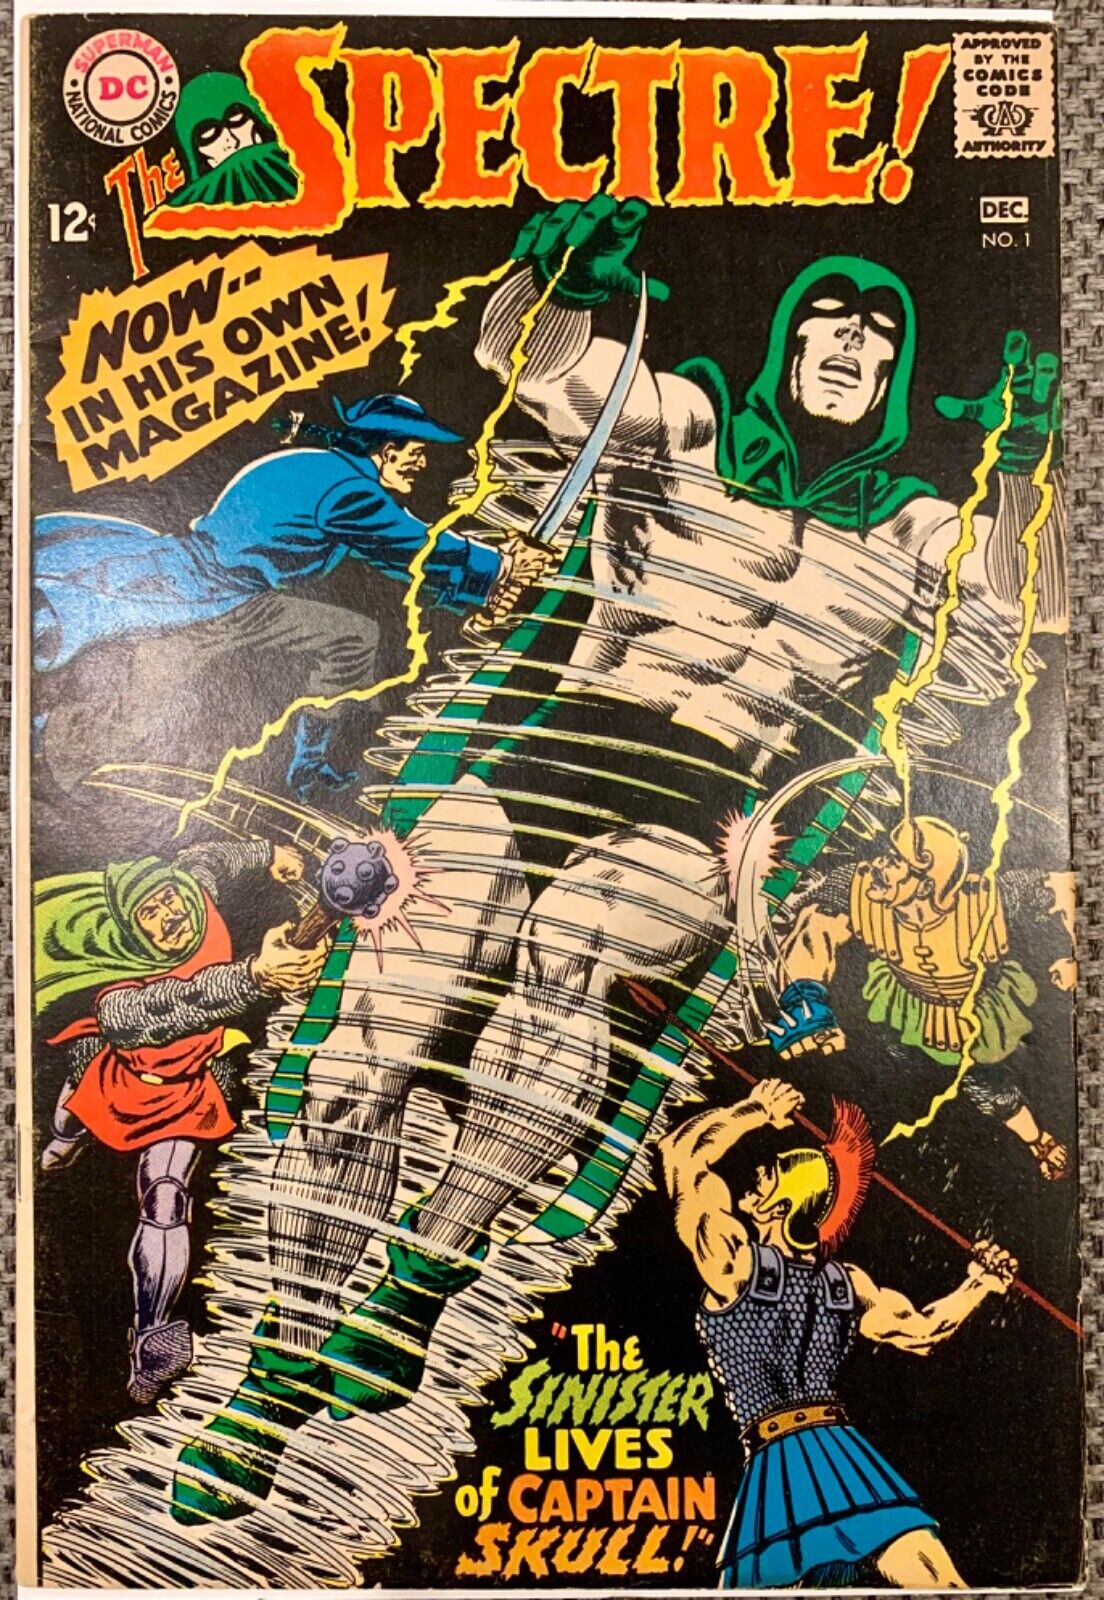 The Spectre #1 First Solo series, Silver Age key